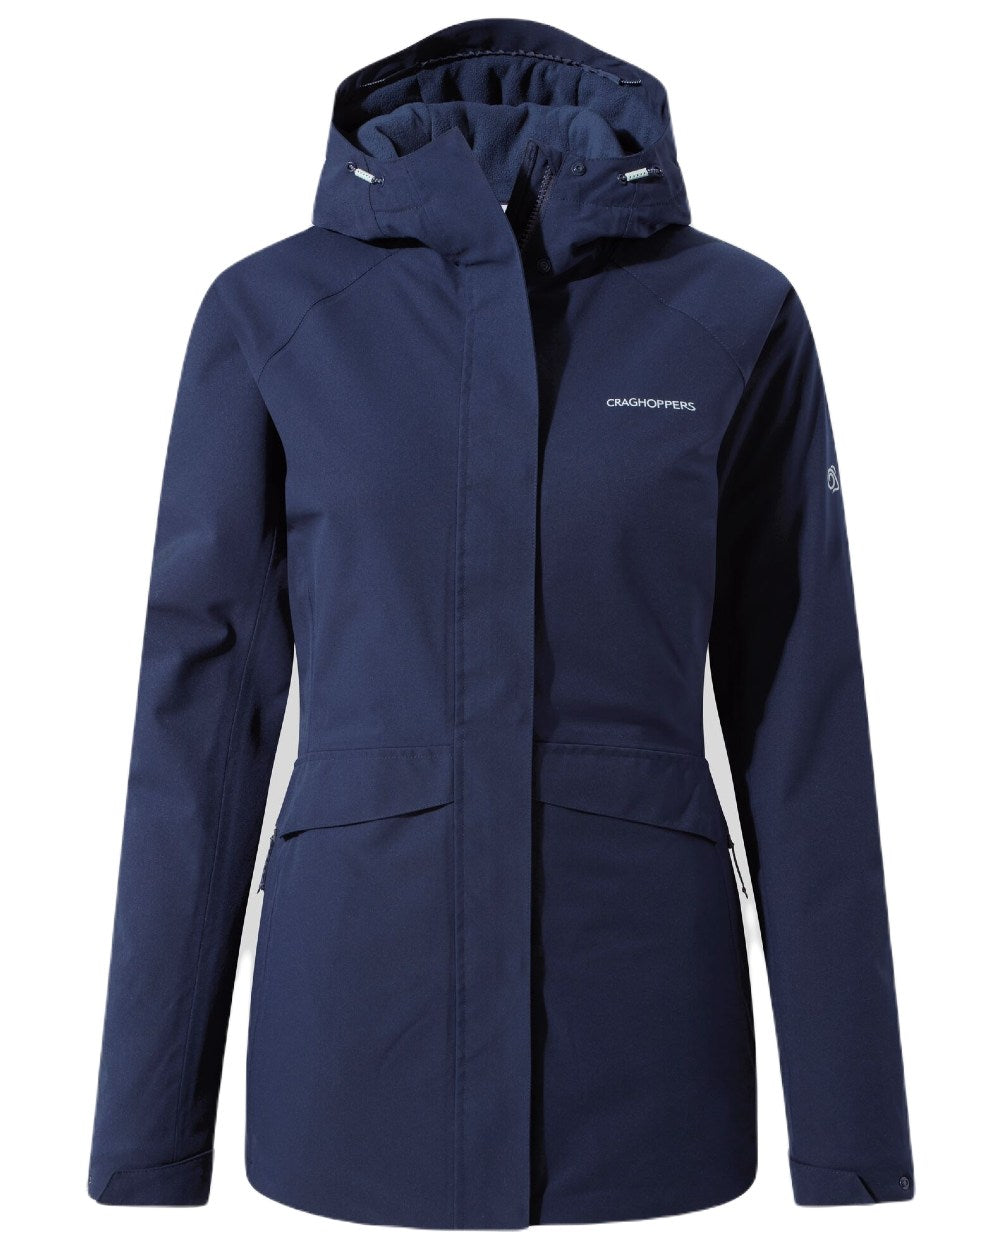 Blue Navy/Blue Navy Coloured Craghoppers Caldbeck Womens Waterproof Thermal Jacket On A White Background 